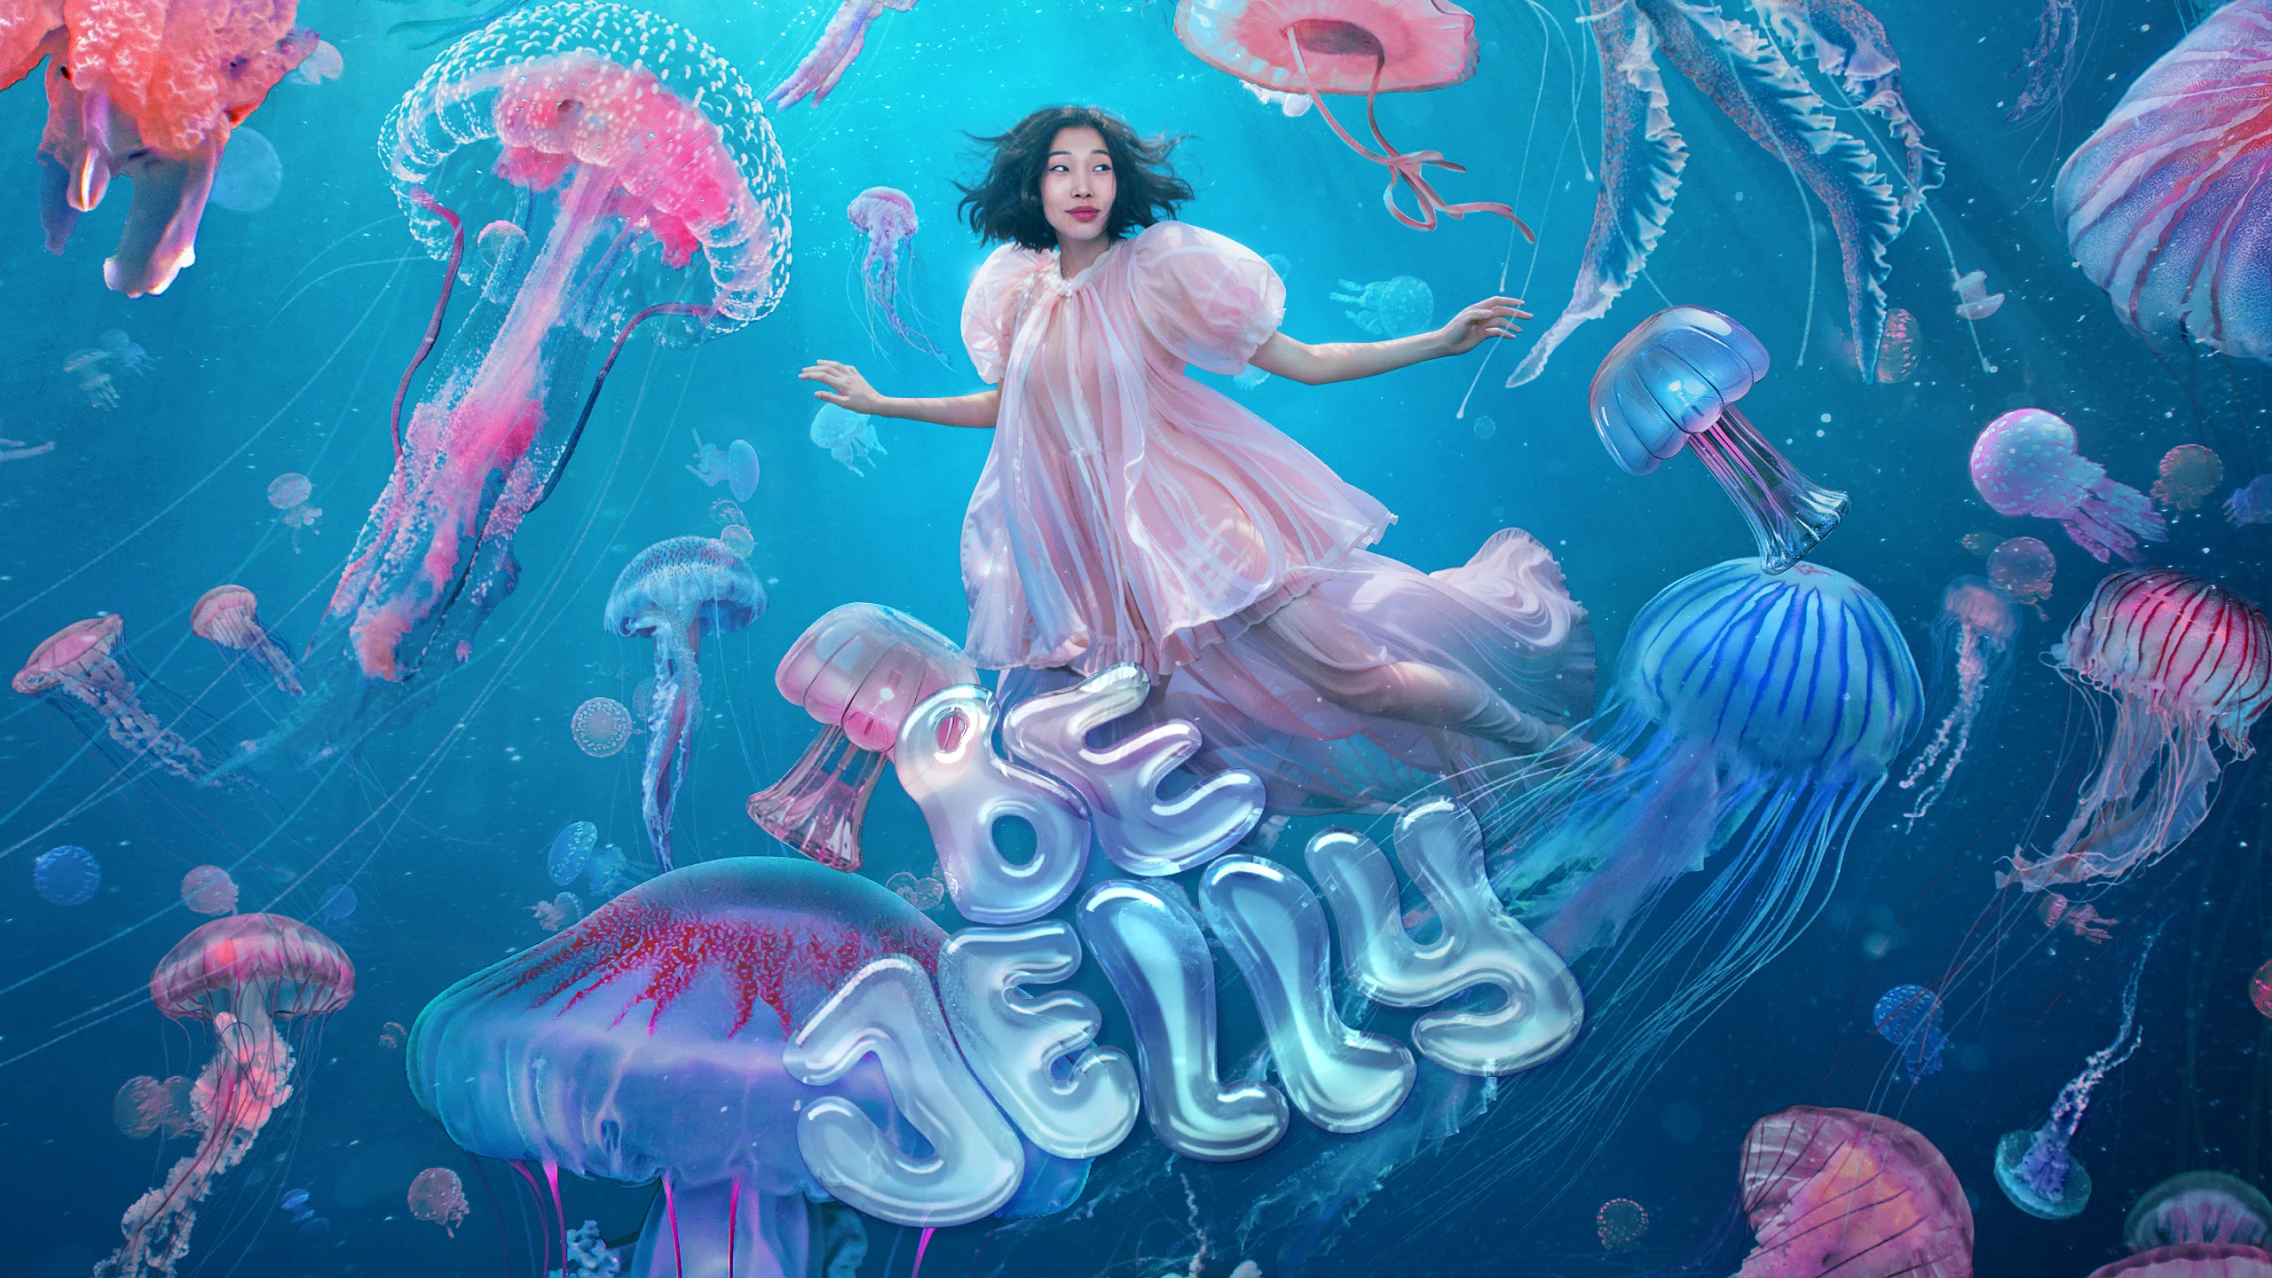 Whimsical image of an Asian woman wearing a sheer pink dress swimming amidst multicolored jellyfish in the sea. “Be Jelly” is written out in jelly-like bubble font in the center of the image.